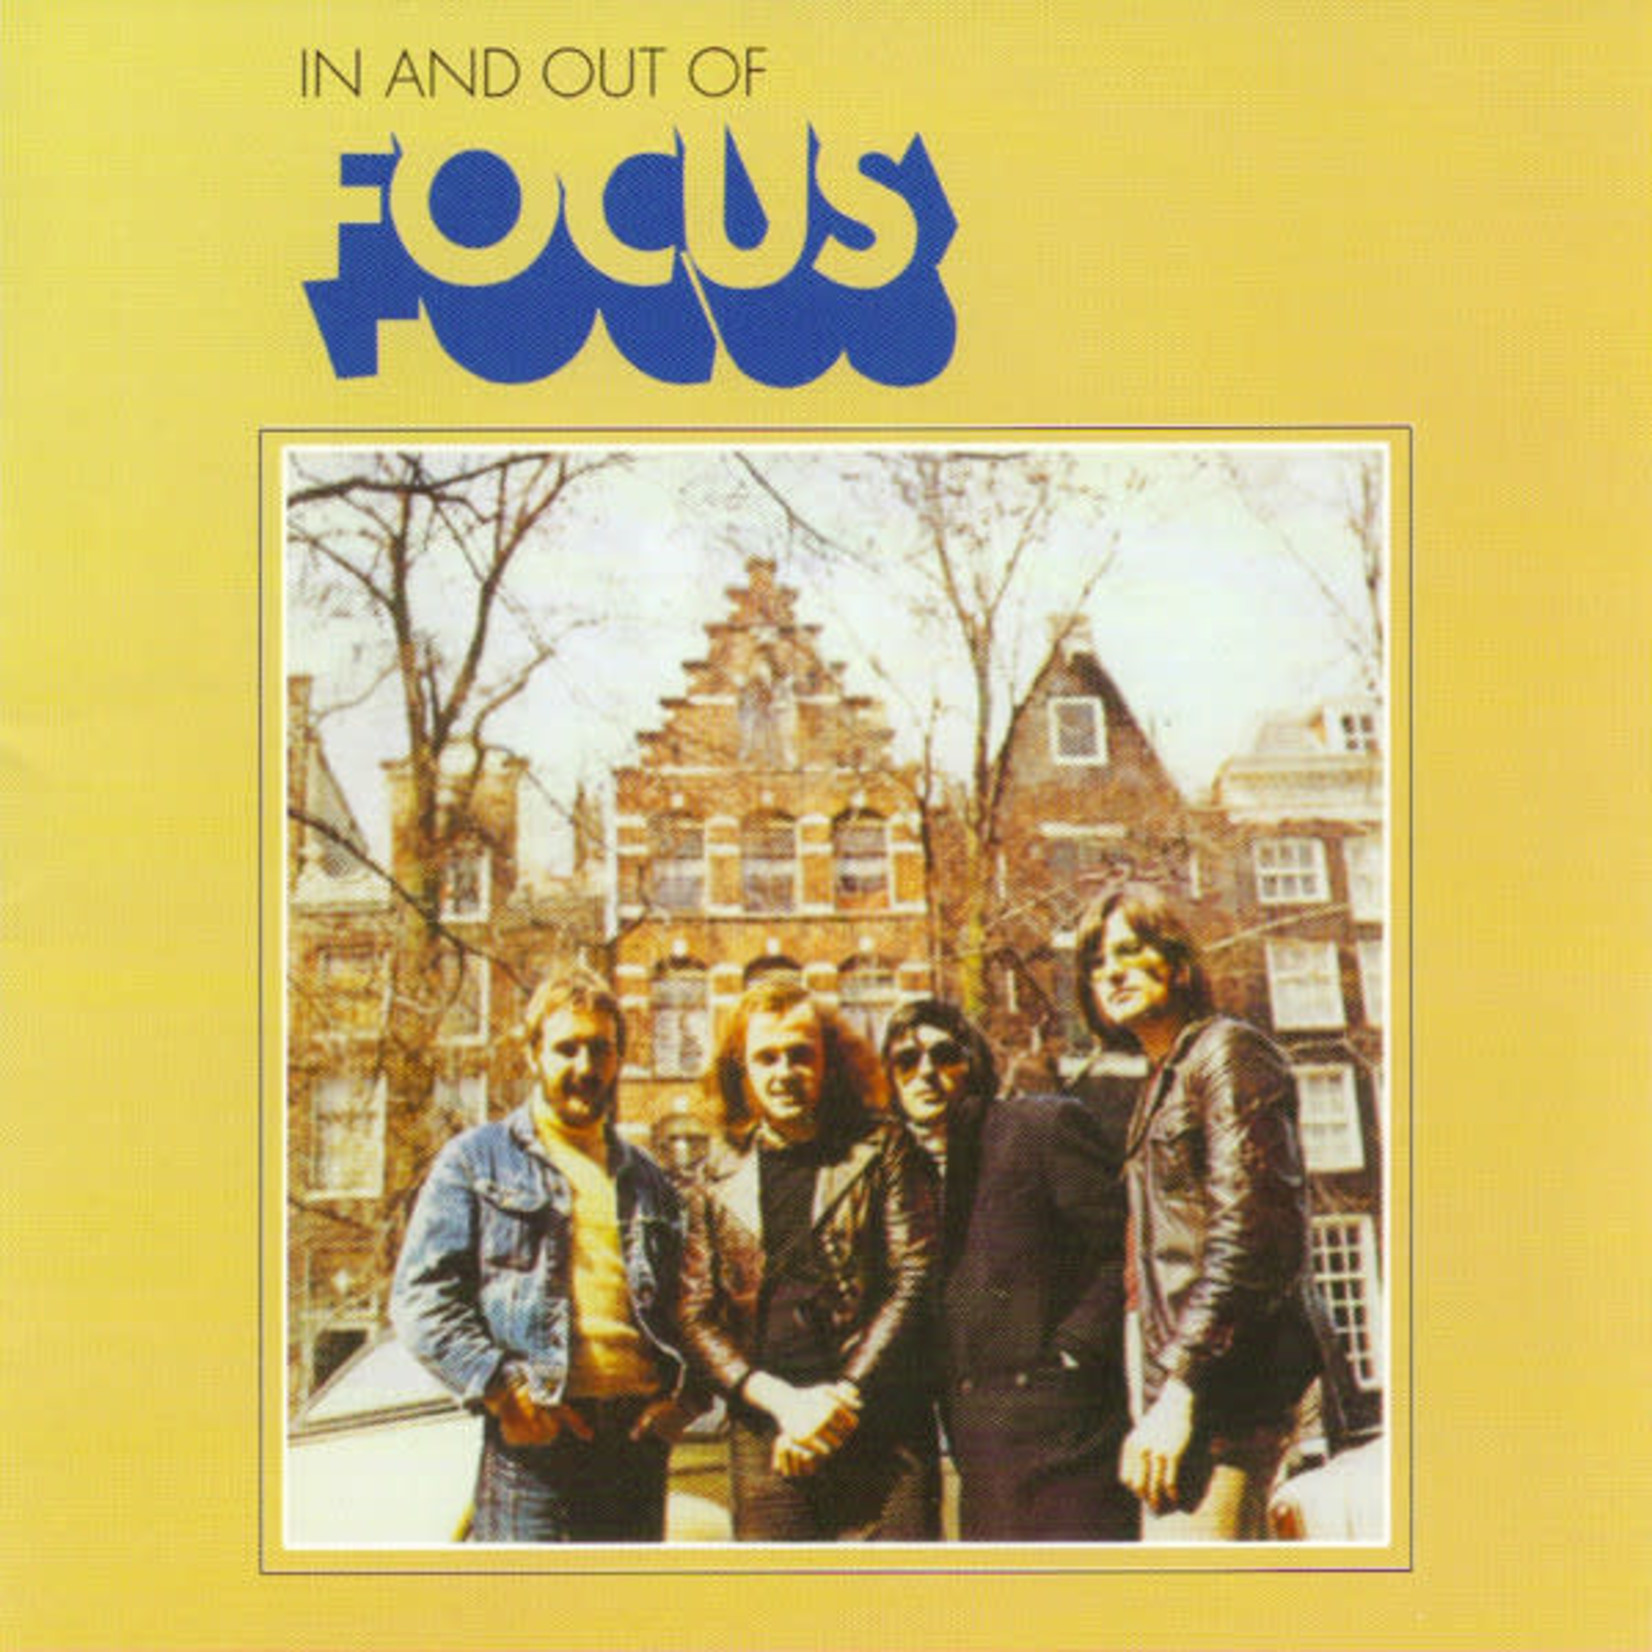 Focus: In and Out of (1st LP reissued) [VINTAGE]